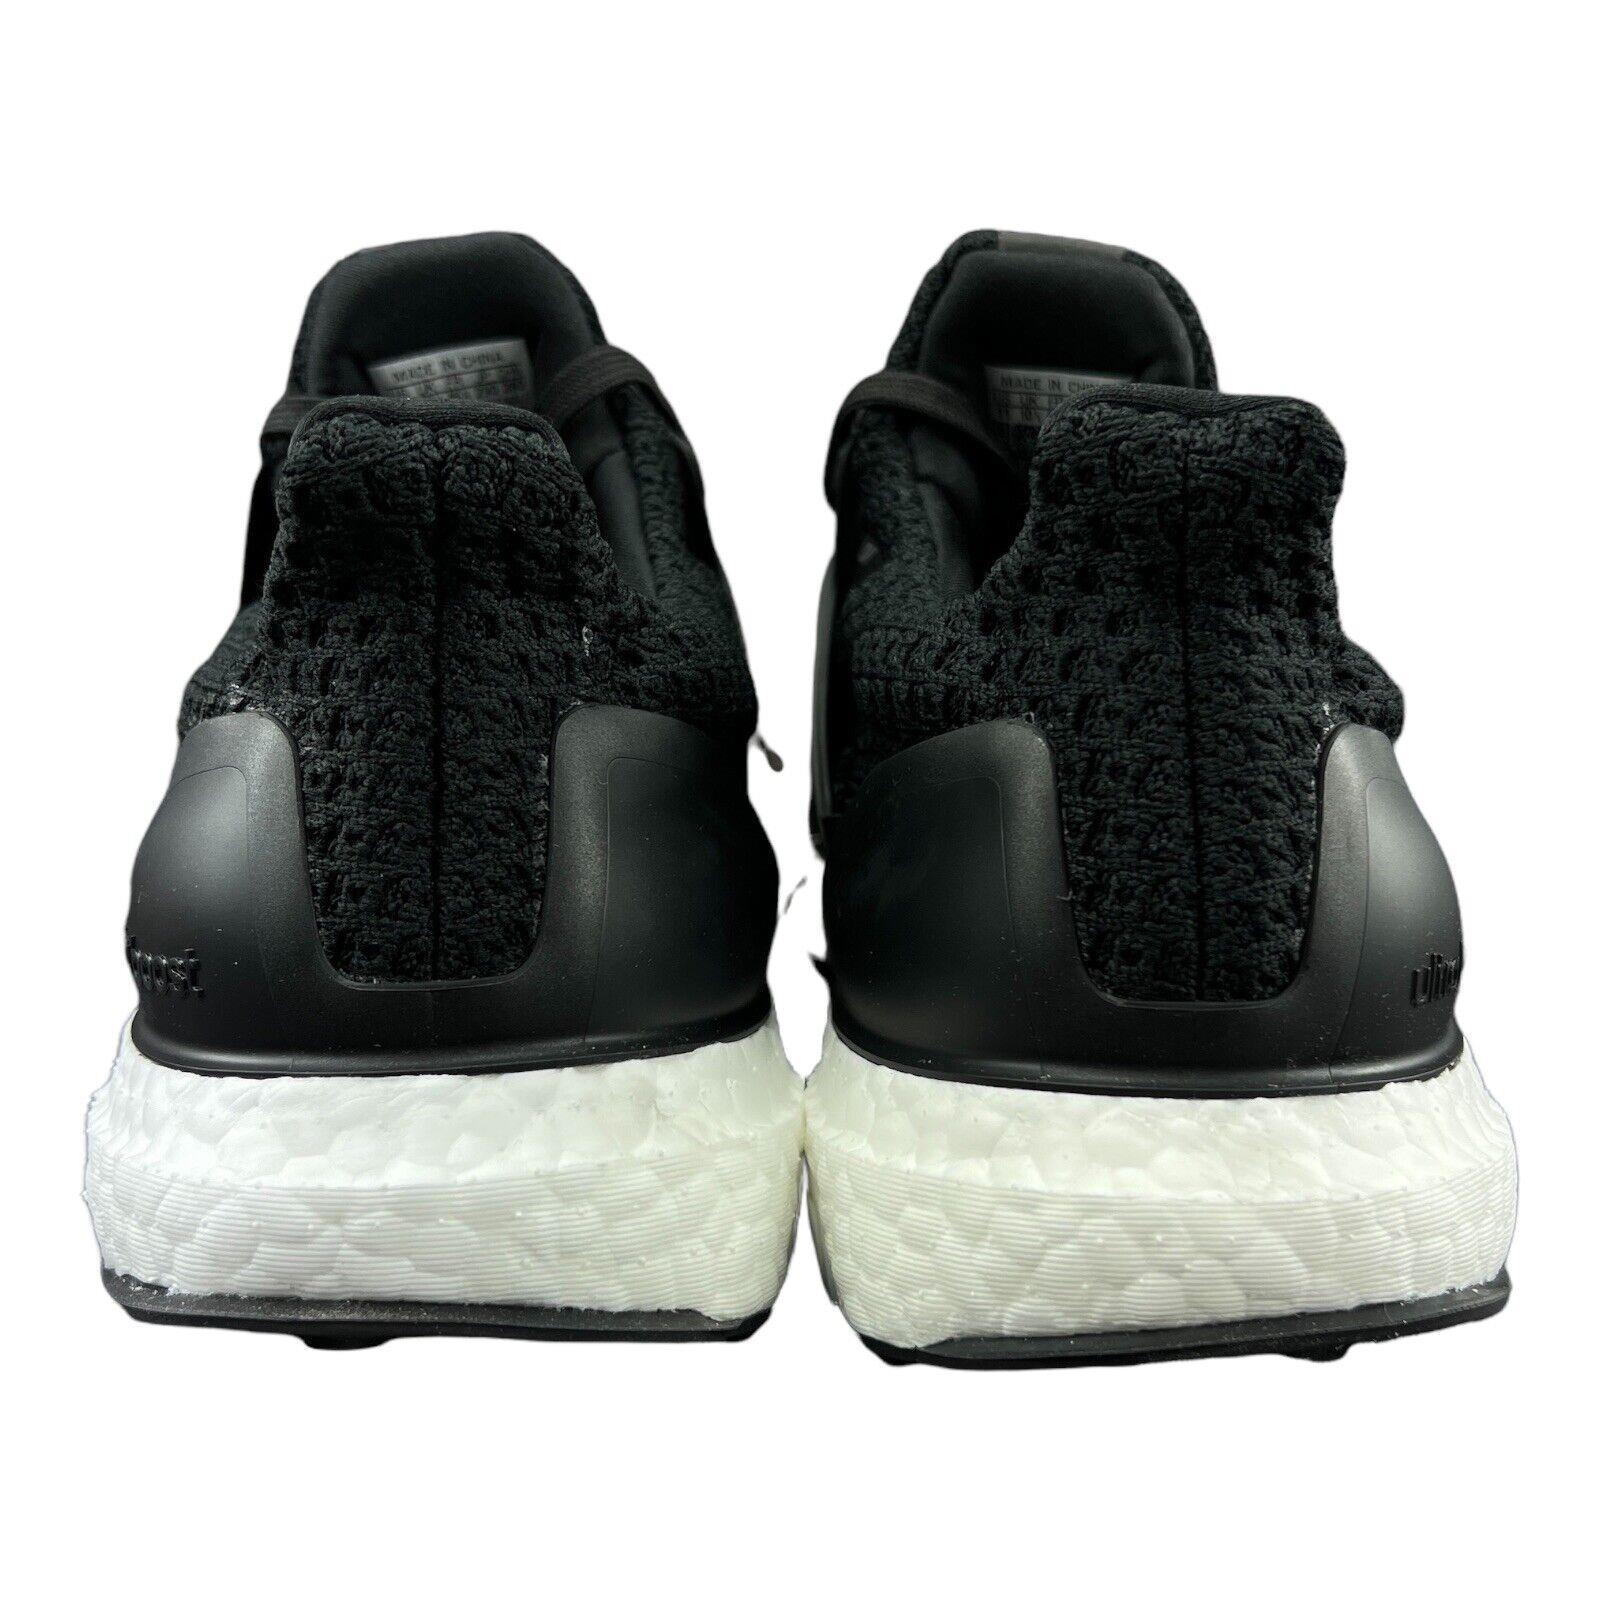 Adidas shoes UltraBoost DNA - Black 0